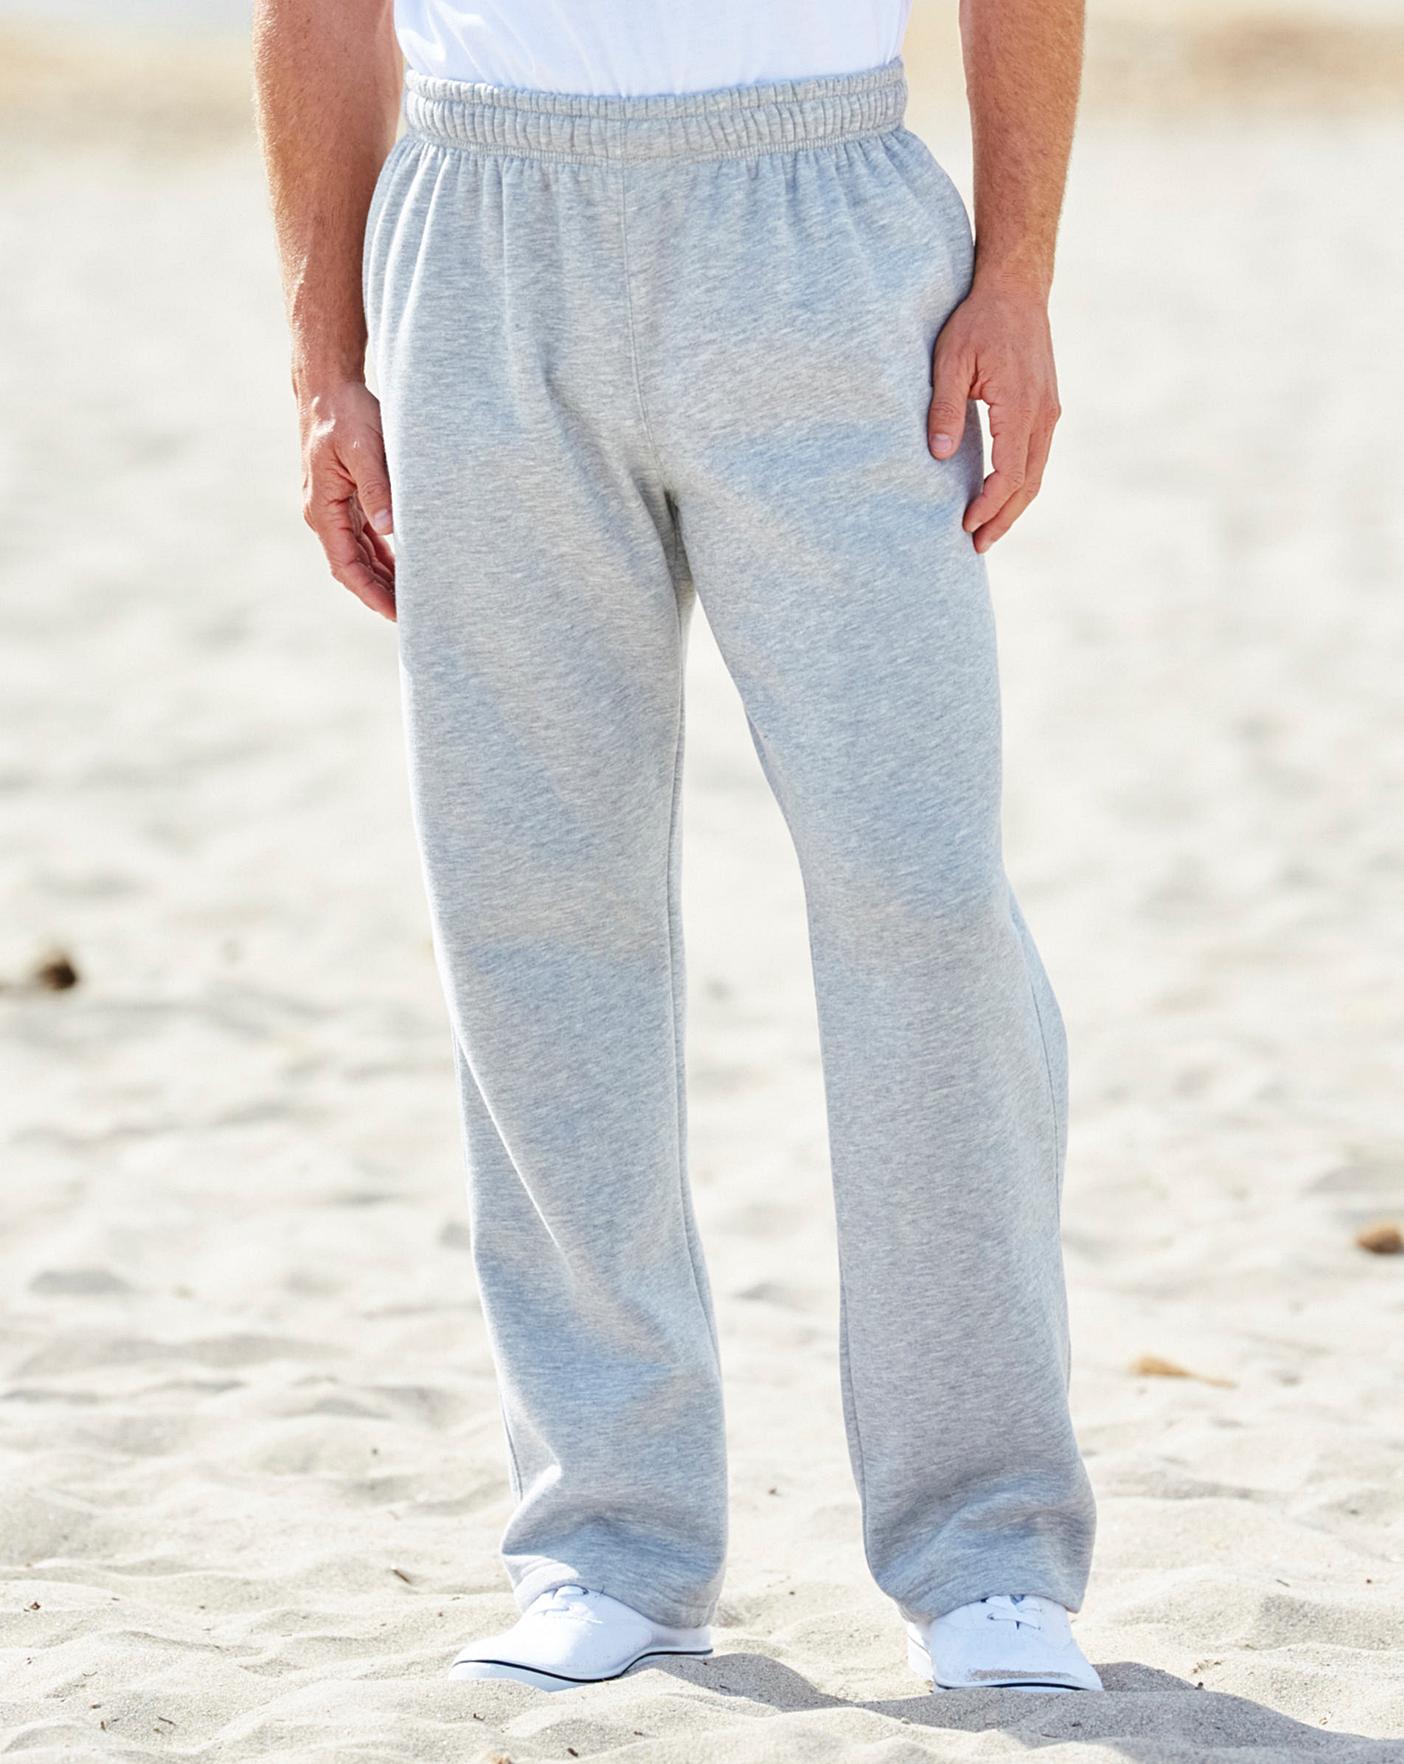 leisure trousers